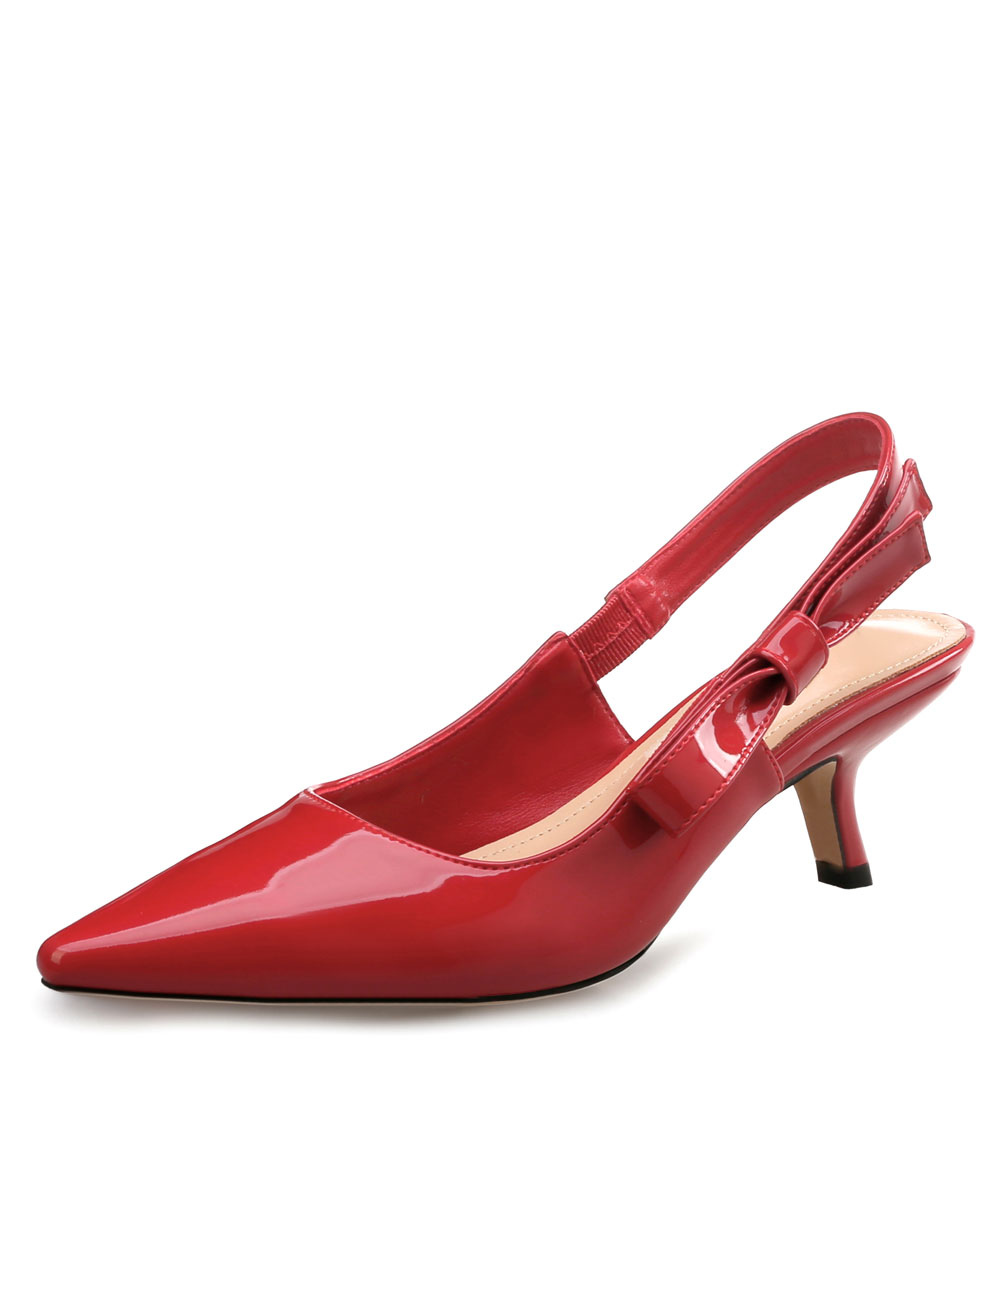 Pointed Toe Pumps Women's Red Slingback 